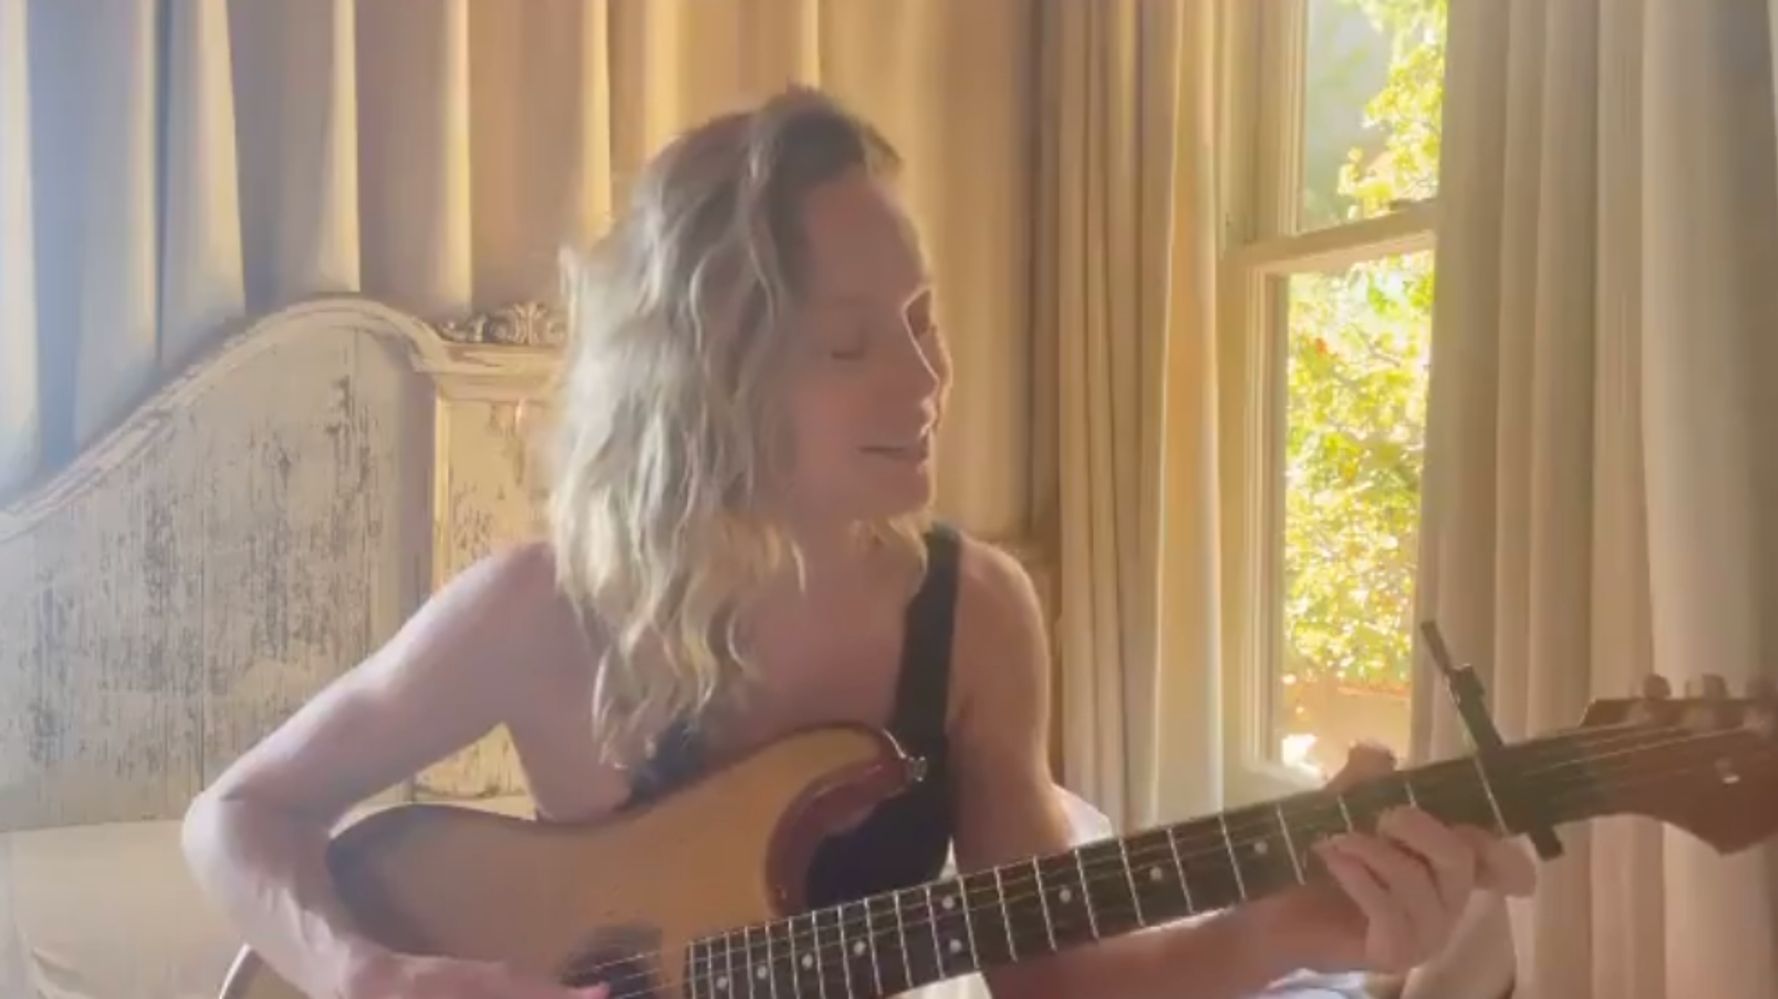 Brie Larson Reminds Fans She's Got Pipes With K-Pop Cover And It's A Delight